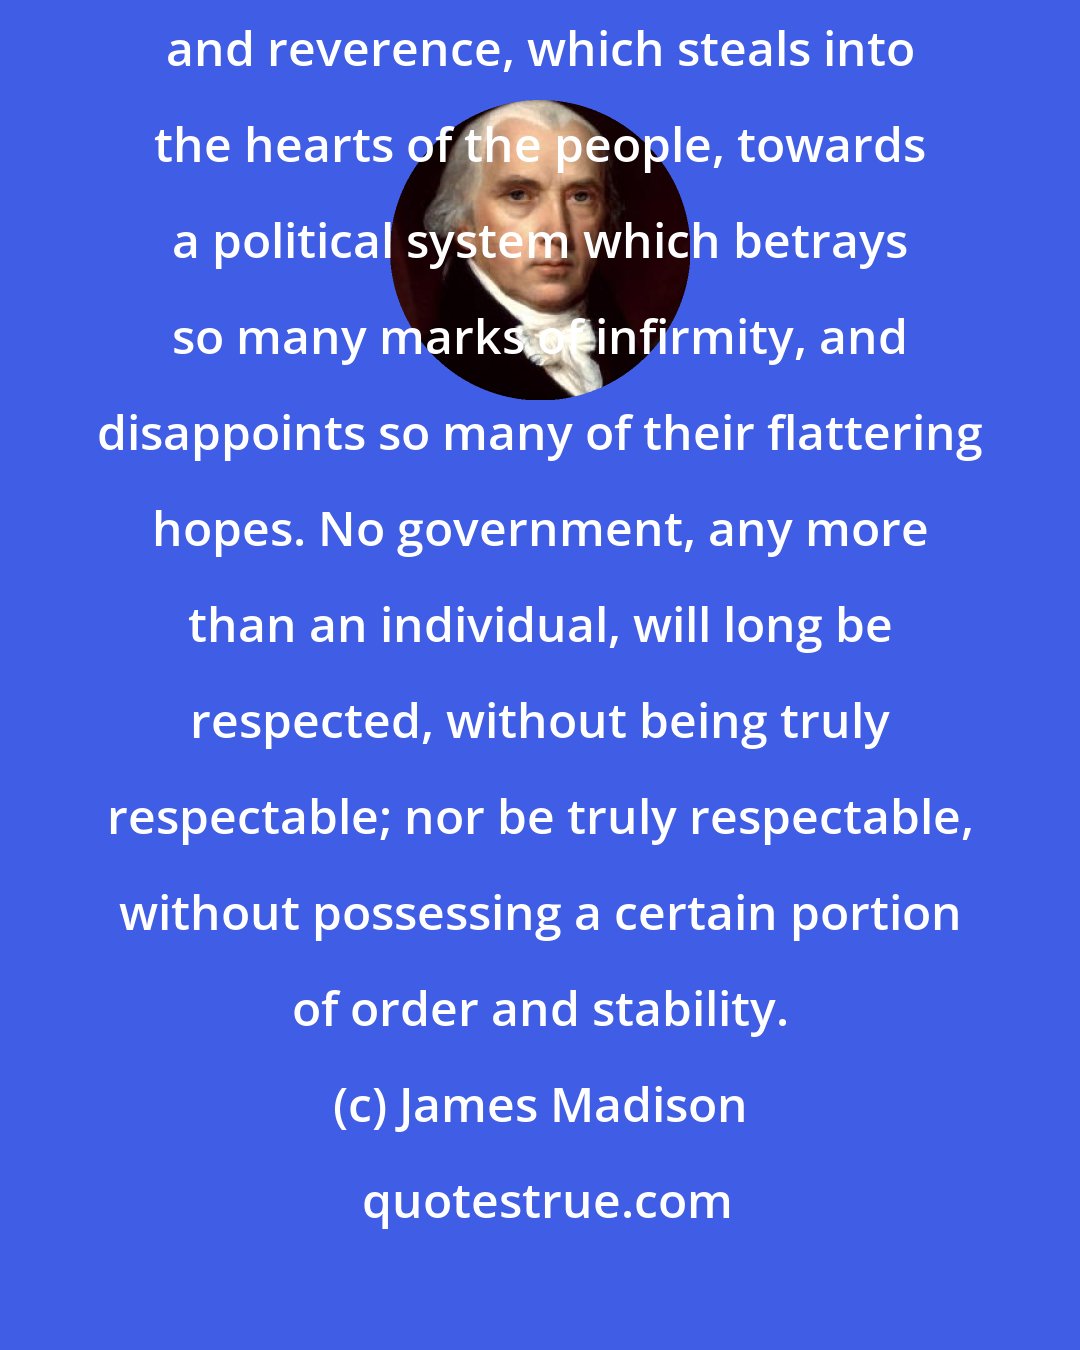 James Madison: But the most deplorable effect of all, is that diminution of attachment and reverence, which steals into the hearts of the people, towards a political system which betrays so many marks of infirmity, and disappoints so many of their flattering hopes. No government, any more than an individual, will long be respected, without being truly respectable; nor be truly respectable, without possessing a certain portion of order and stability.